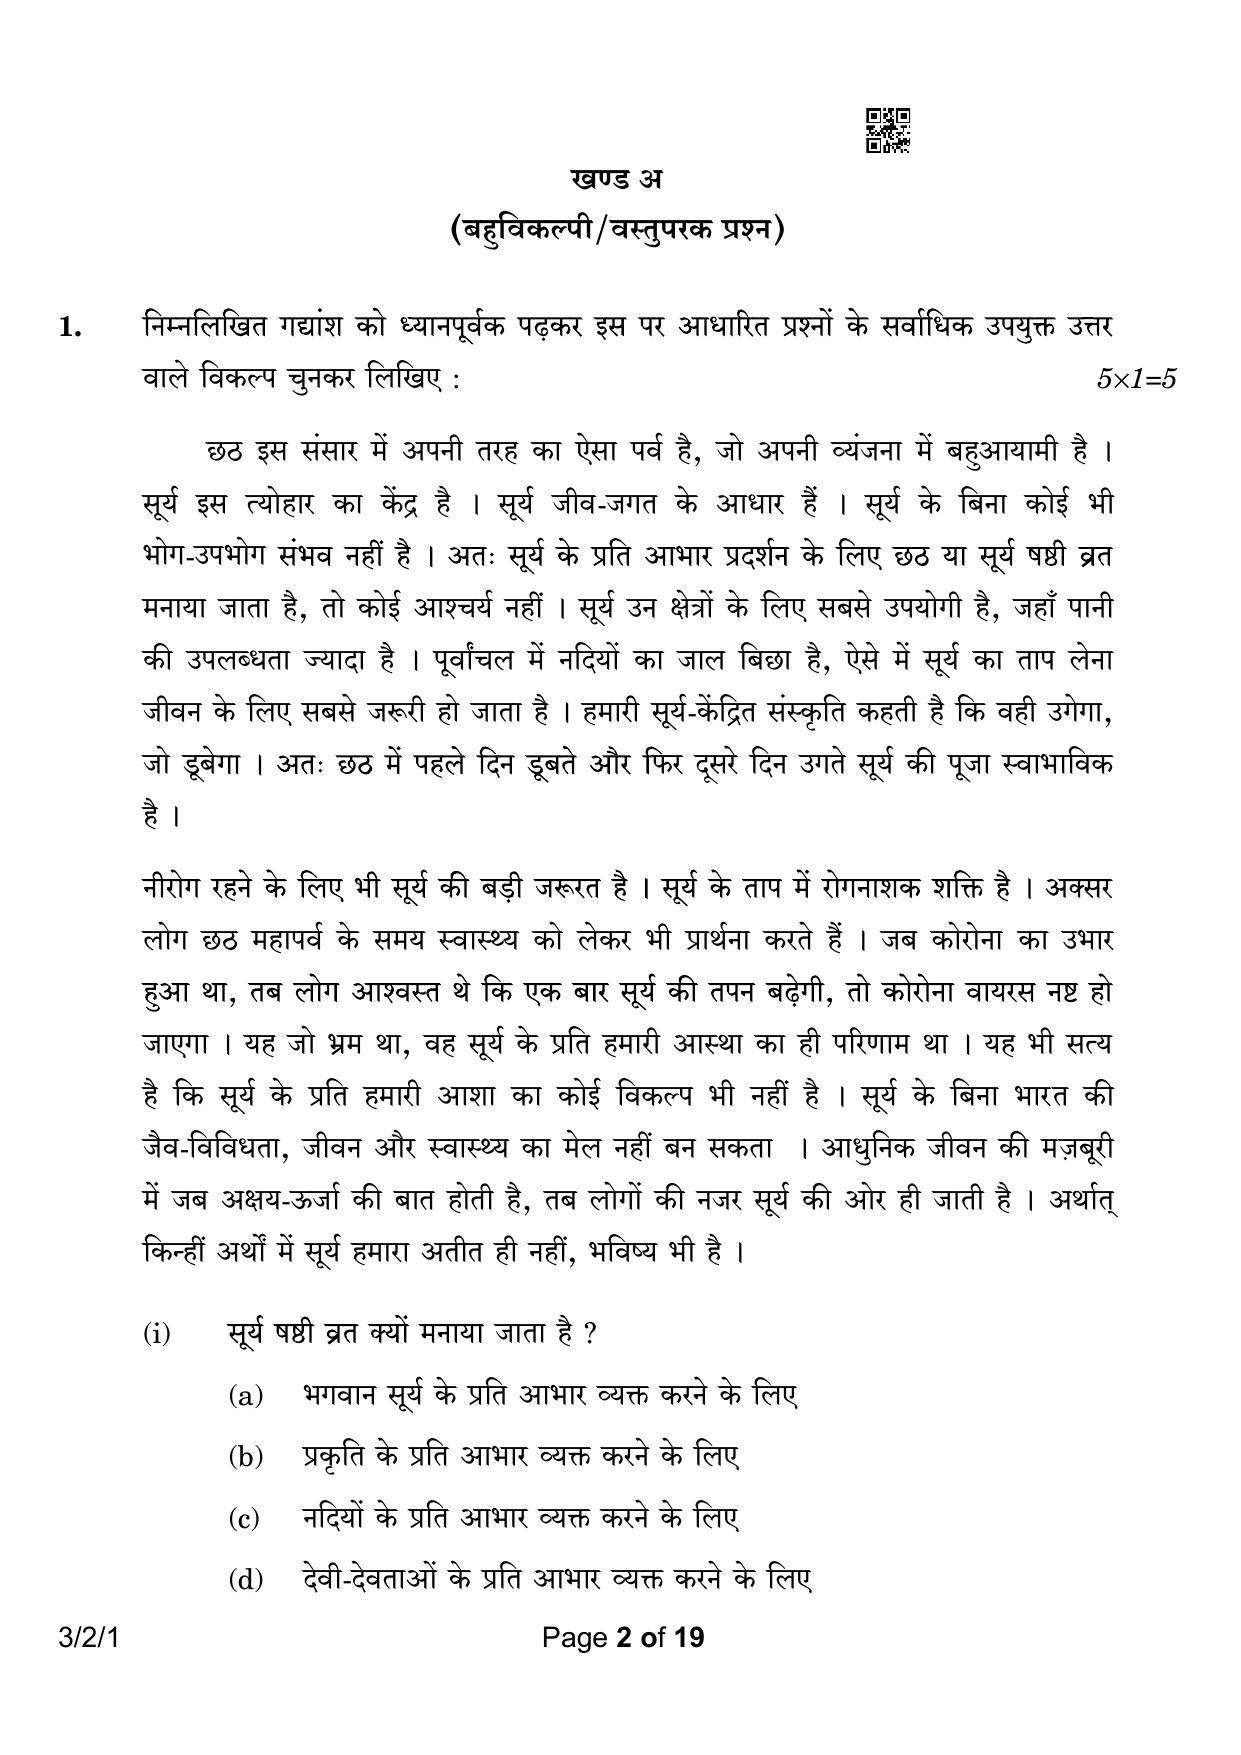 CBSE Class 10 3-2-1 Hindi A 2023 Question Paper - Page 2